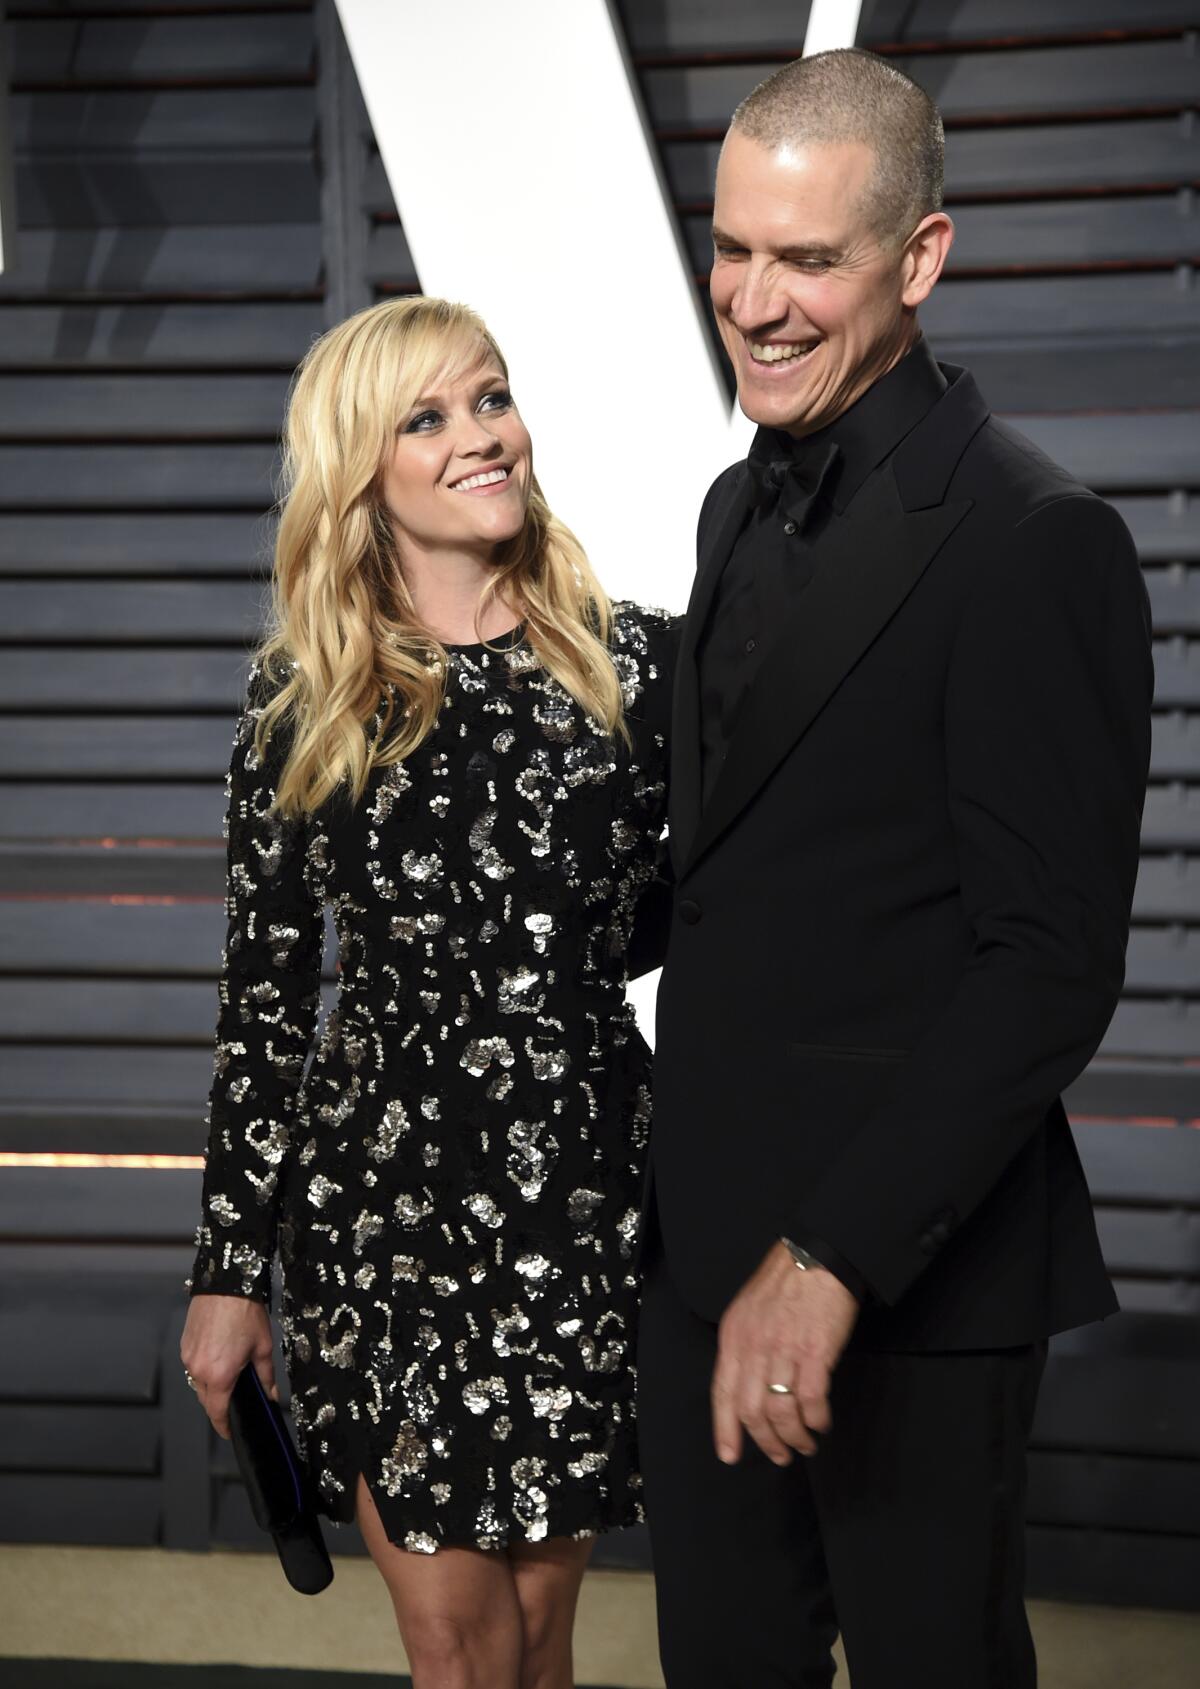 Reese Witherspoon and husband Jim Toth pose upon arrival at an event